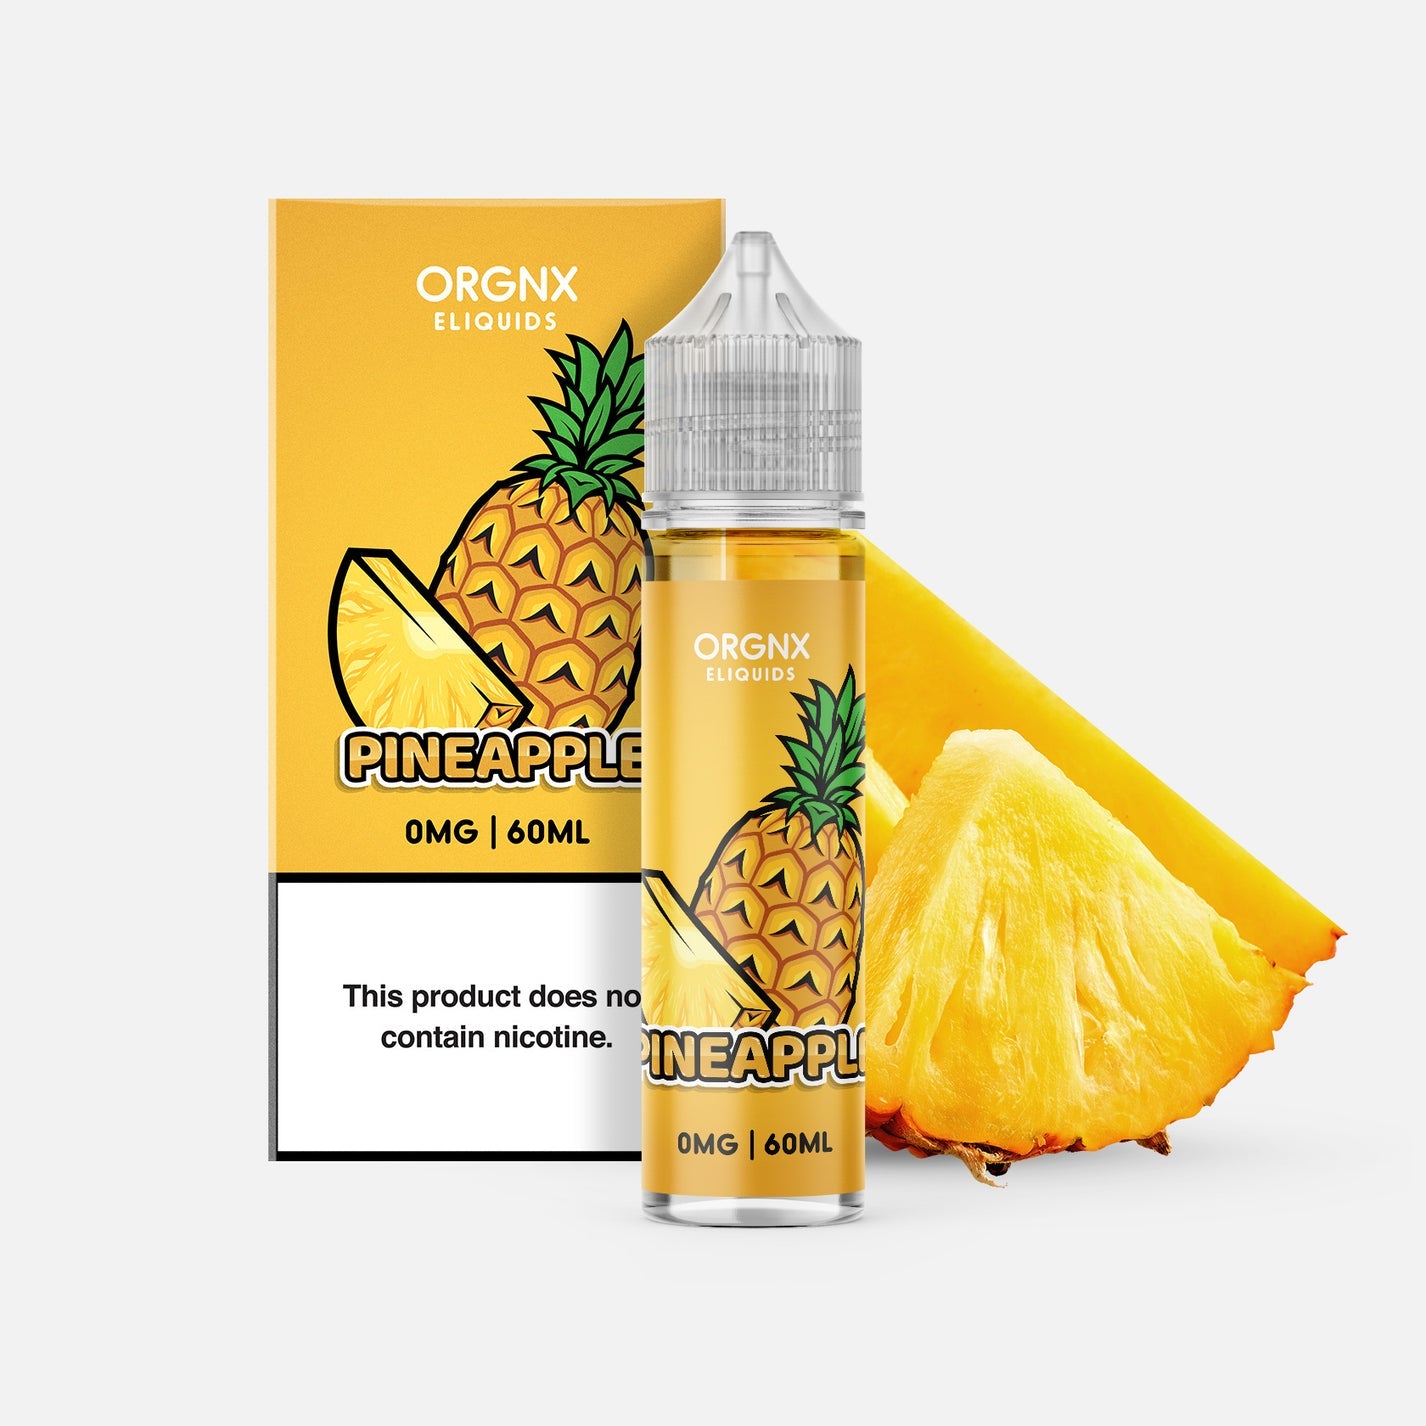 Orgnx - Pineapple